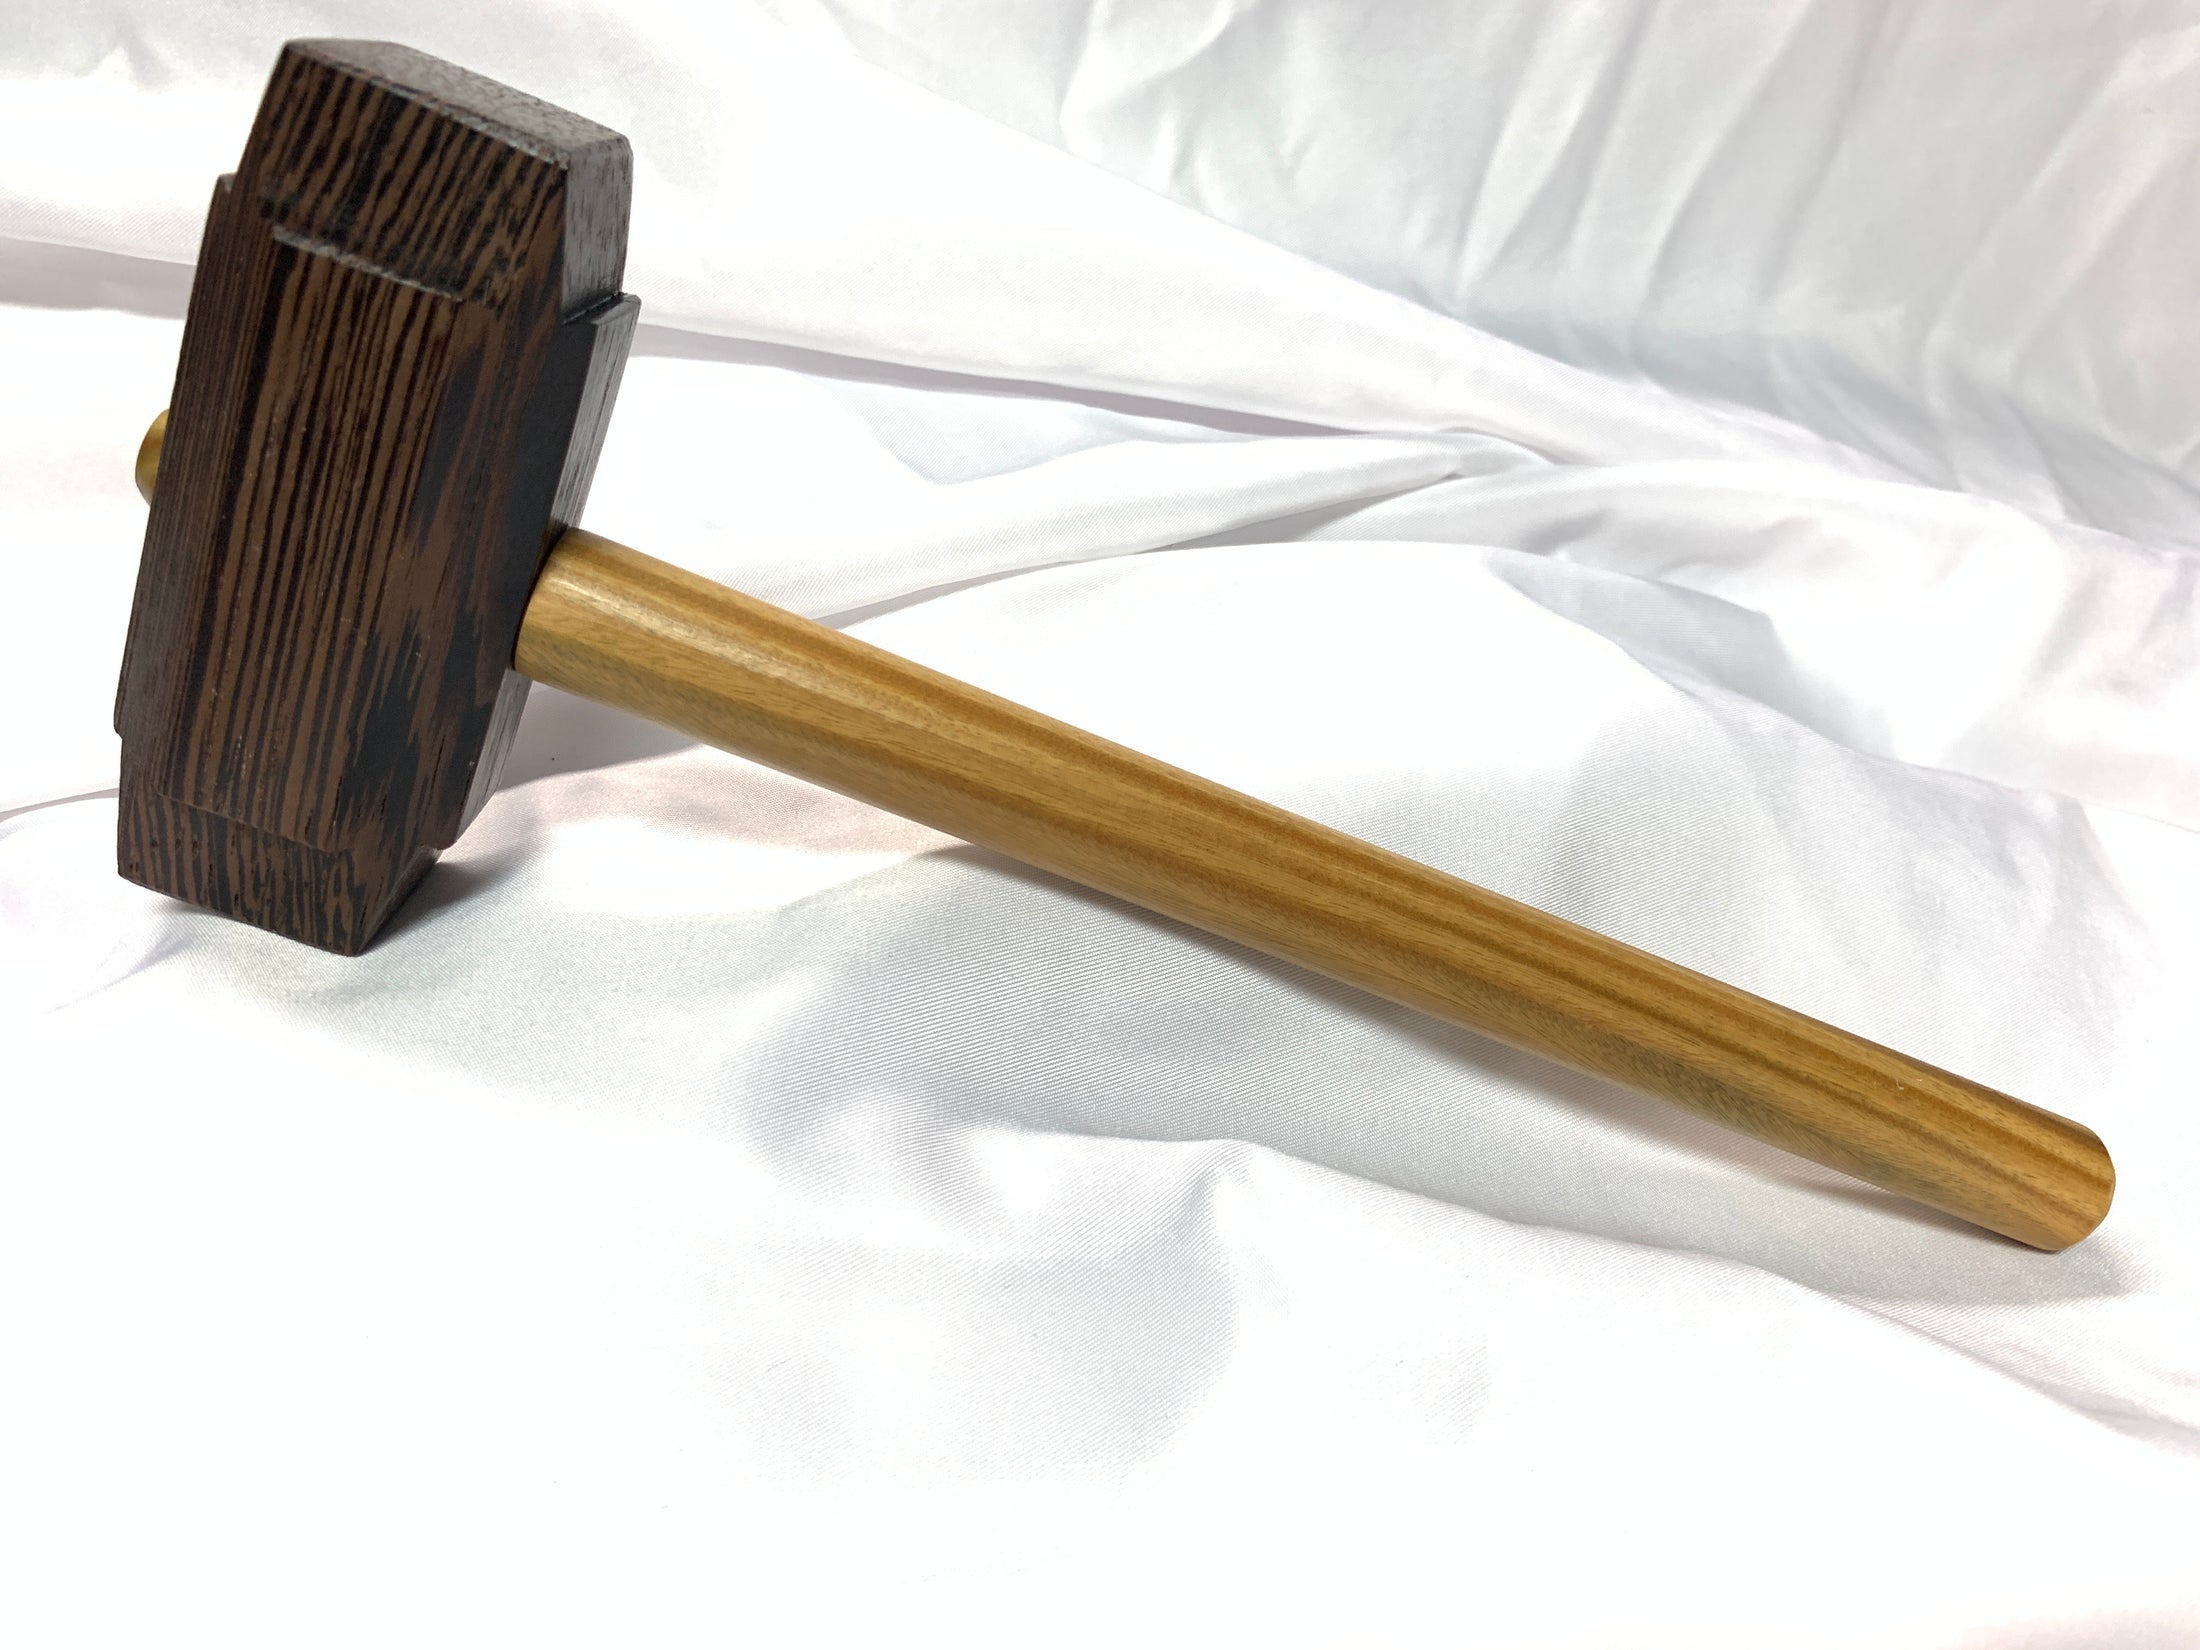 Thors Hammer Woodworking Mallet Wenge Head with Lignum Vitae Handle Kings Fine Woodworking